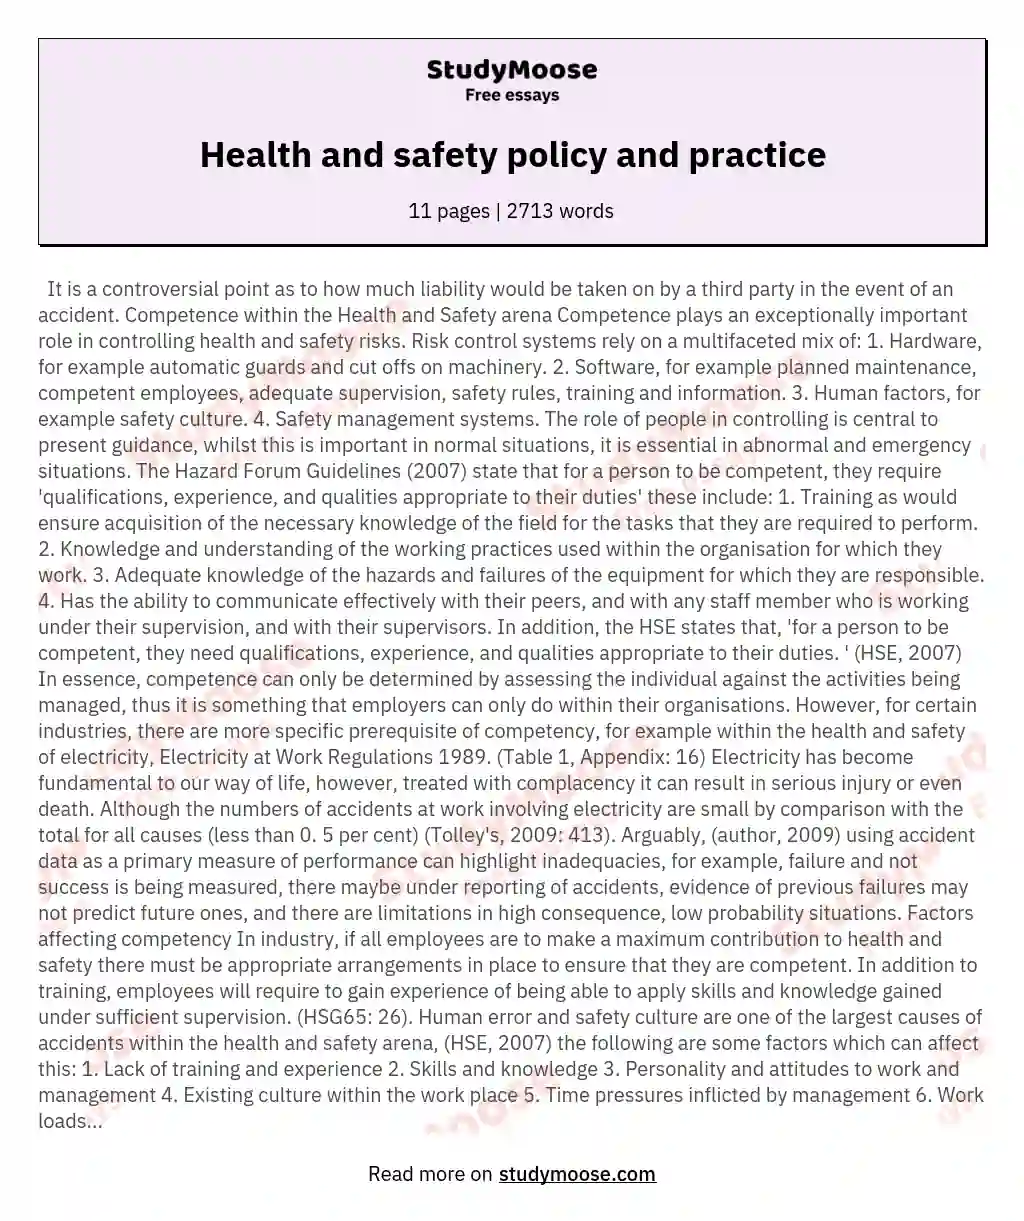 Health and safety policy and practice essay